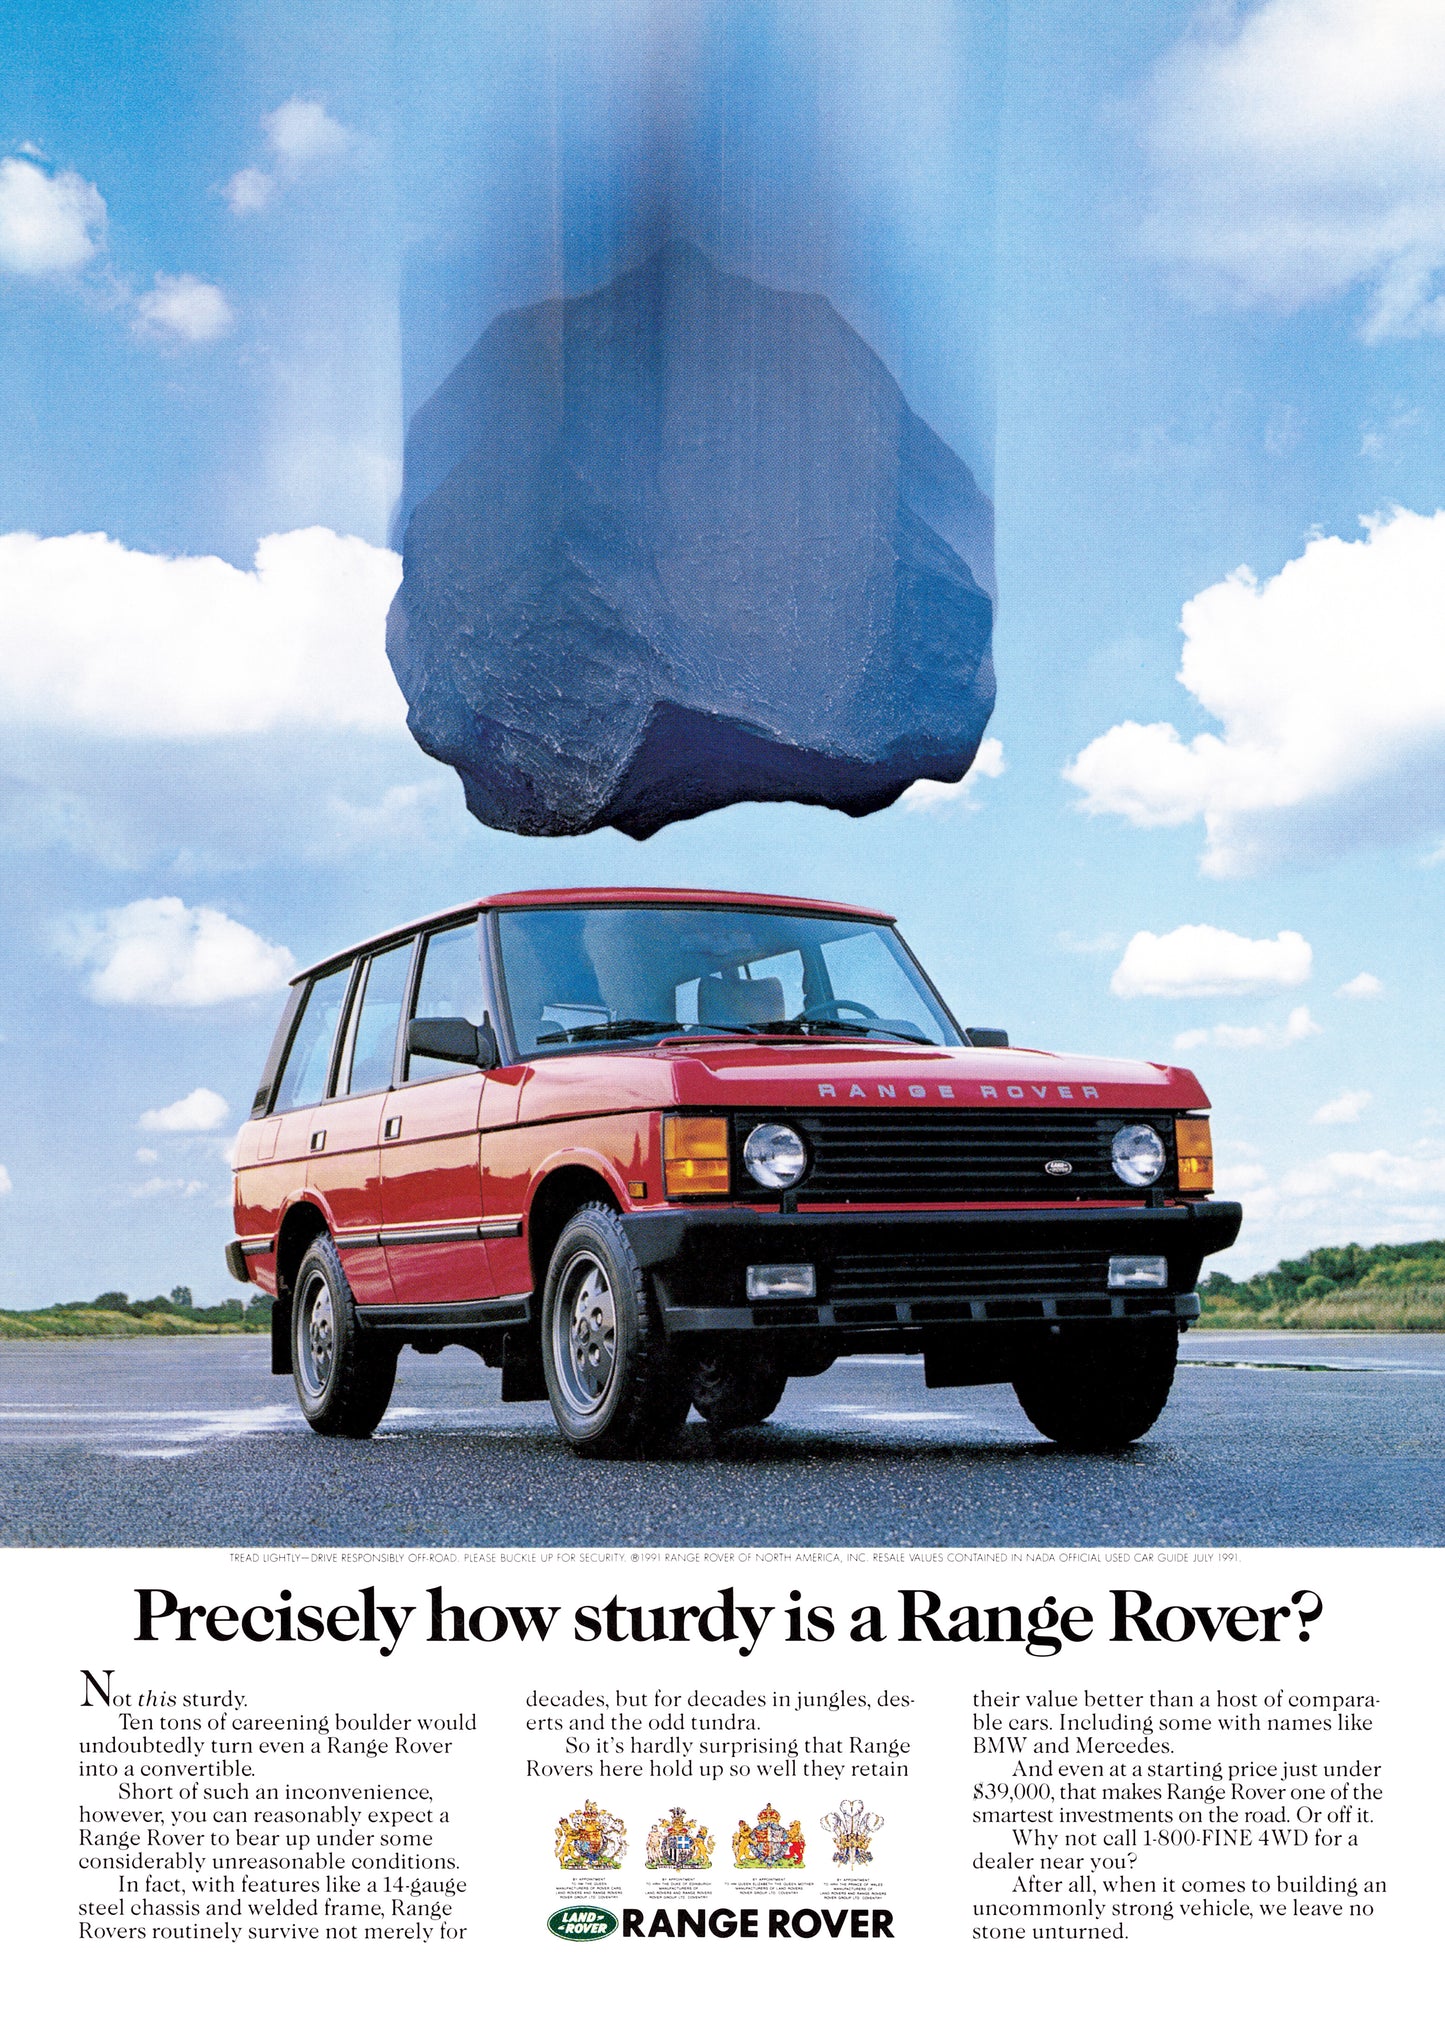 2 Books A Life In Range Rover + A Life In Porsche 911  10 posters A4 for free + Free shipping